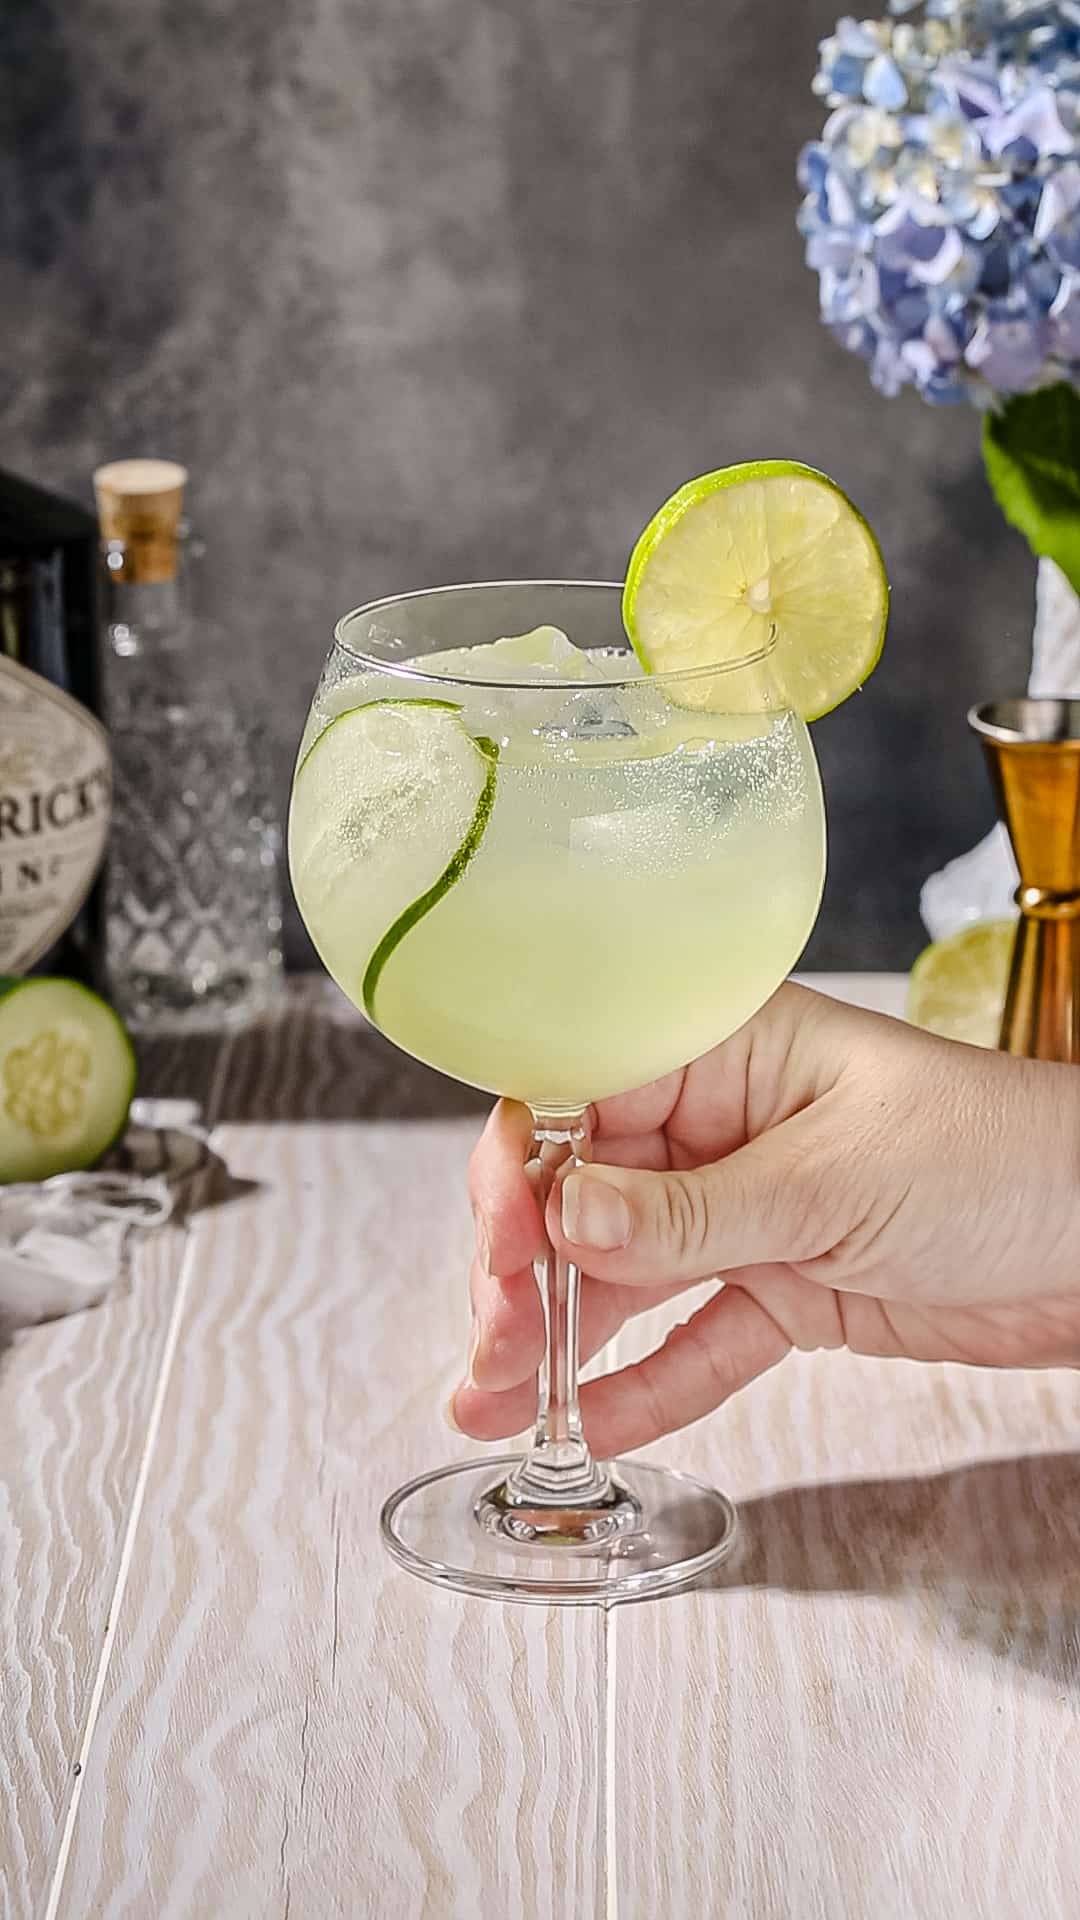 Hand holding the stem of a tall gin and tonic glass filled with a cucumber slice and a light green liquid, with a lime wheel on the rim.